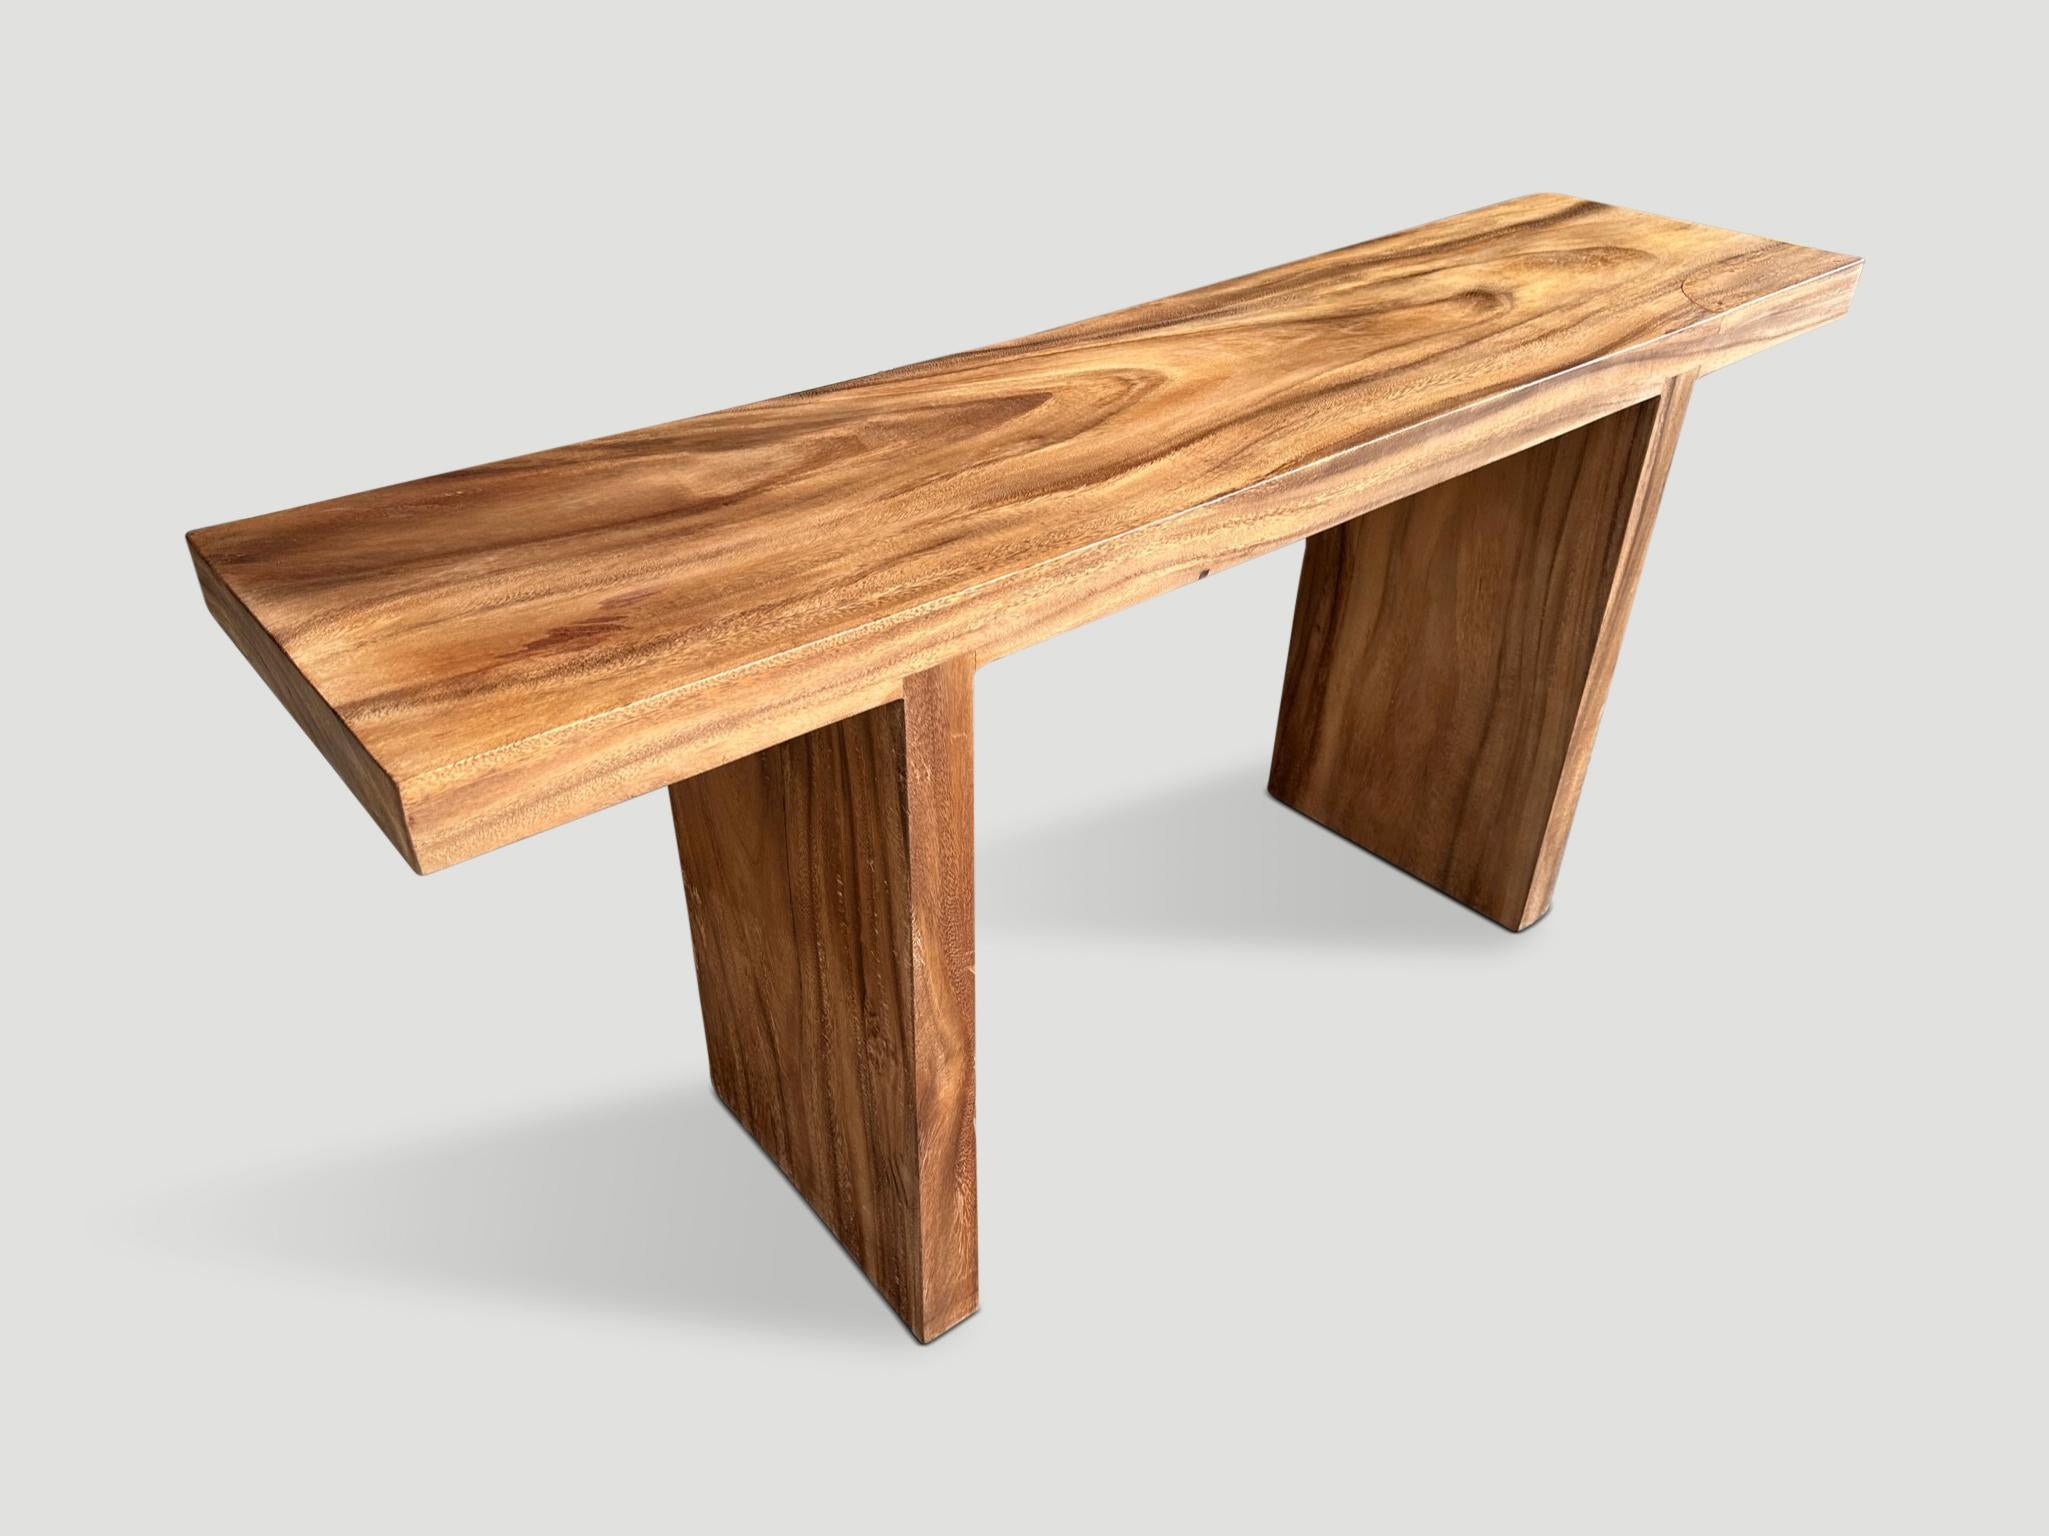 Impressive 2.5” slab suar wood minimalist console table. We added a natural oil revealing the beautiful wood grain. It’s all in the details.

Own an Andrianna Shamaris original.

Andrianna Shamaris. The Leader In Modern Organic Design. 